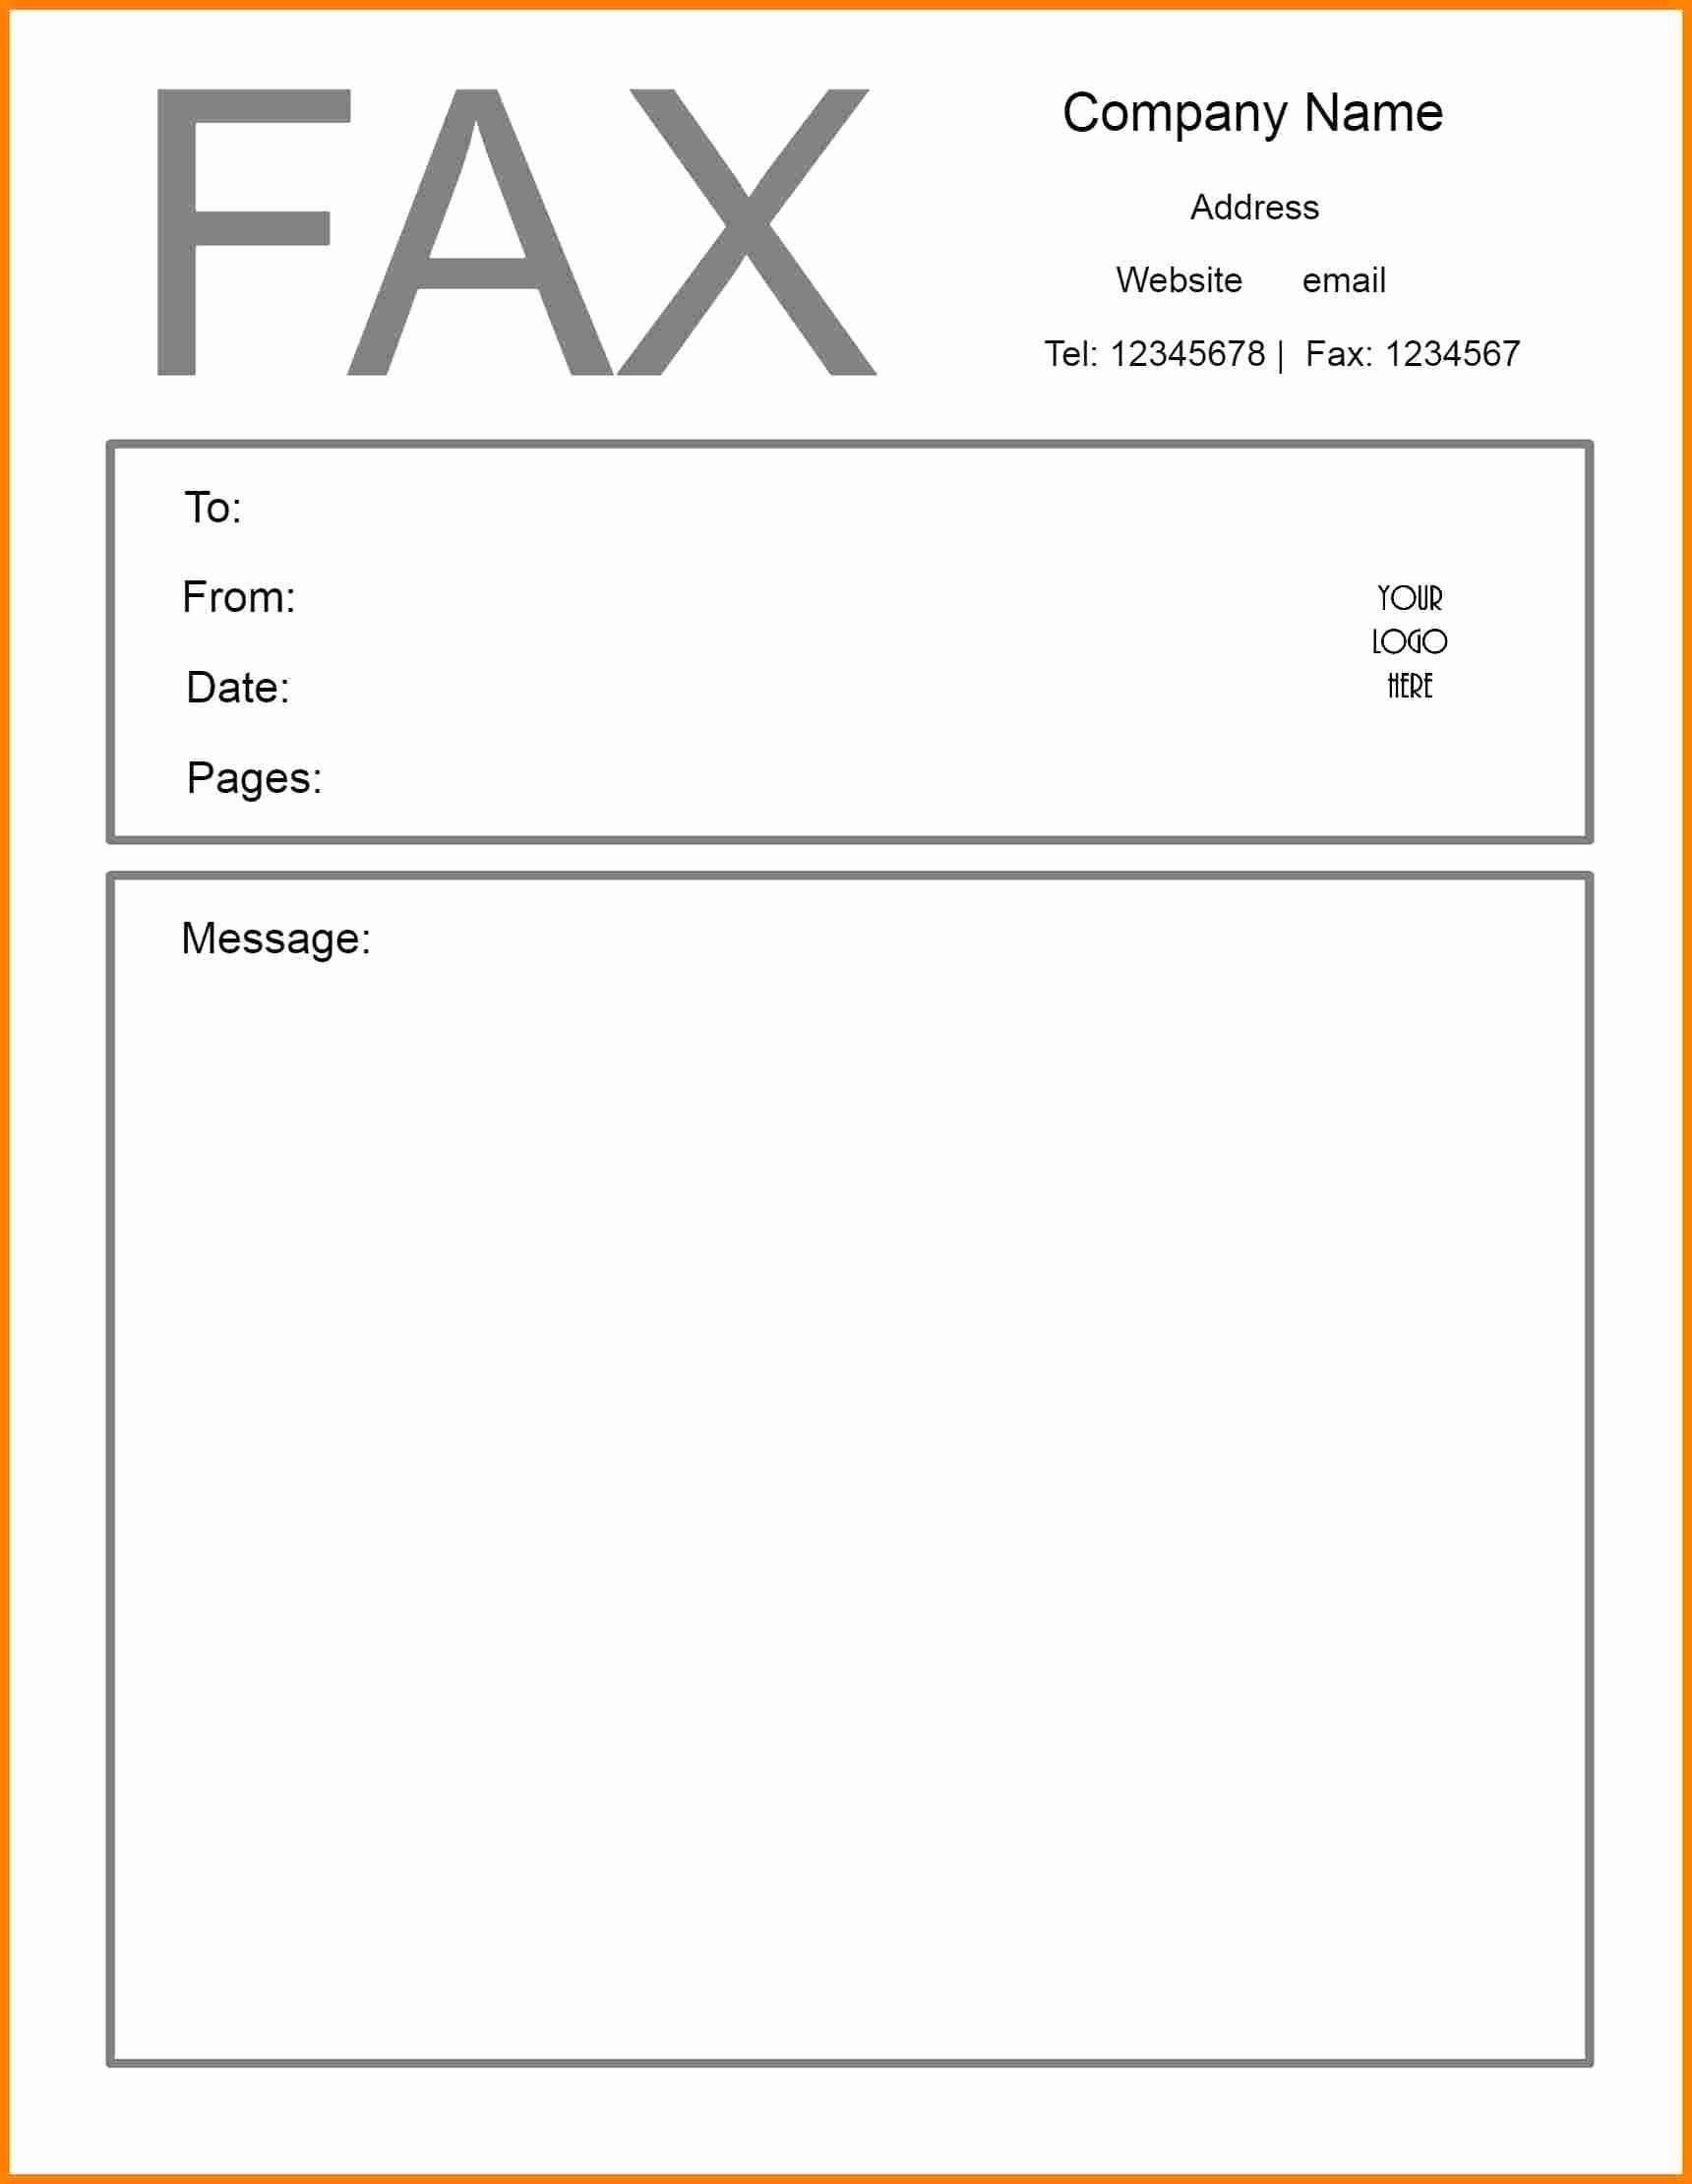 Template For Fax Cover Sheet Luxury Get Professional Personal - Free Printable Fax Cover Sheet